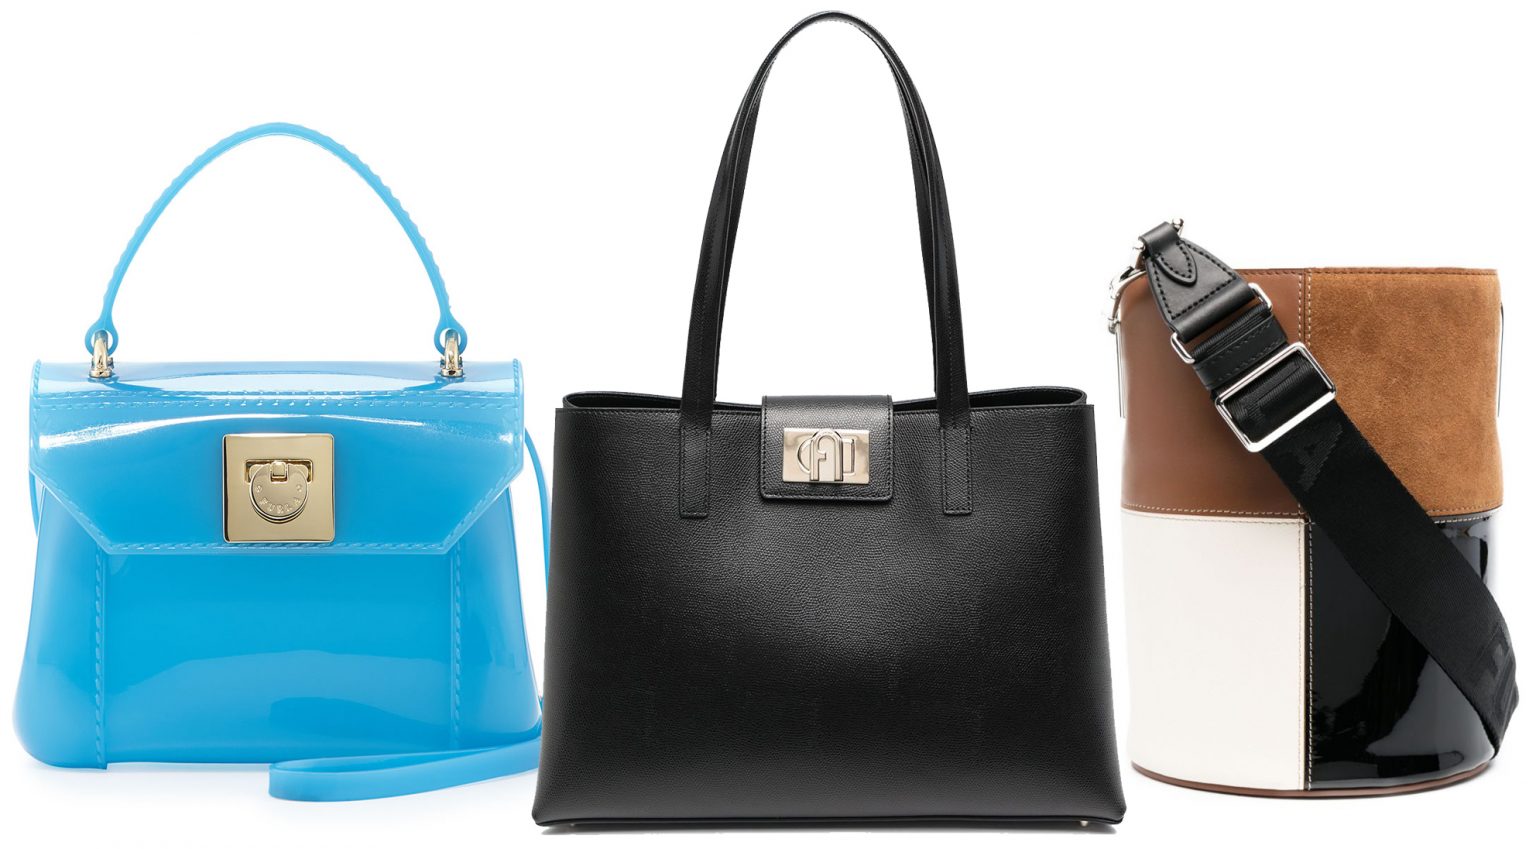 How To Spot Fake Furla Bags: 6 Ways to Tell Real Purses